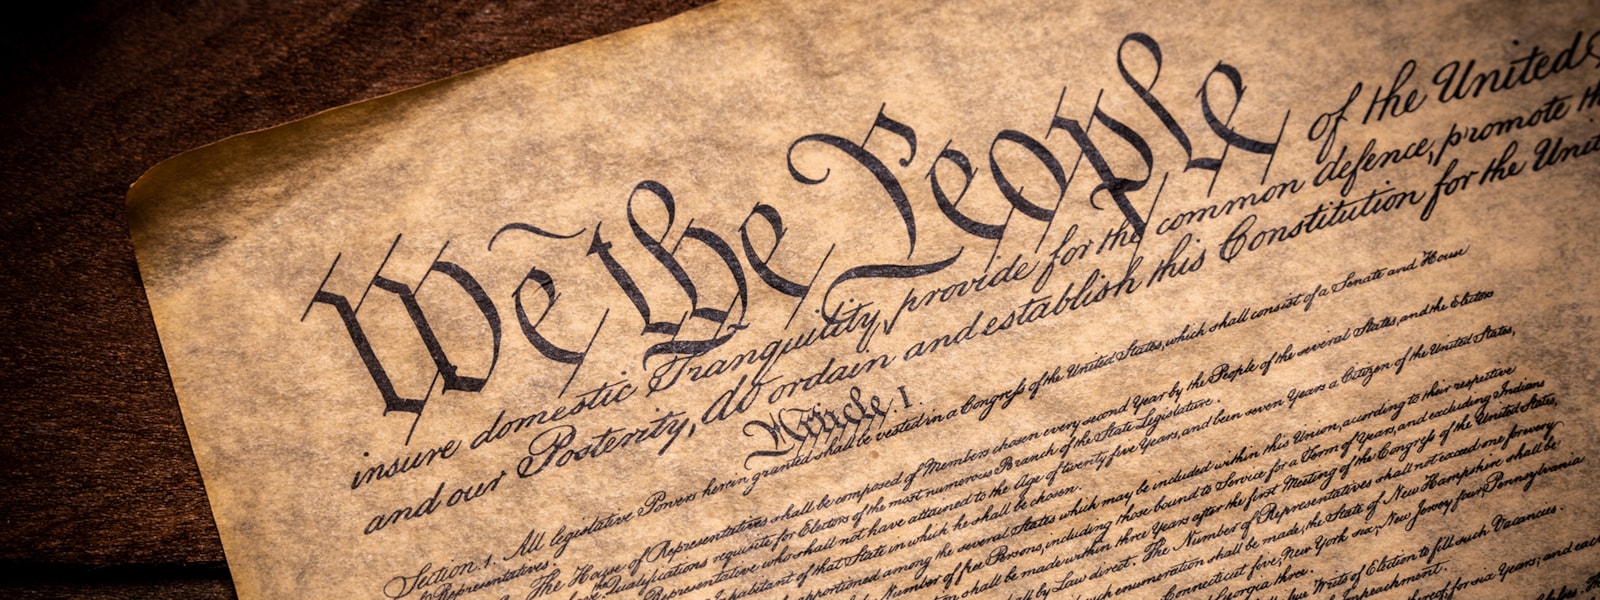 Photo of the Constitution